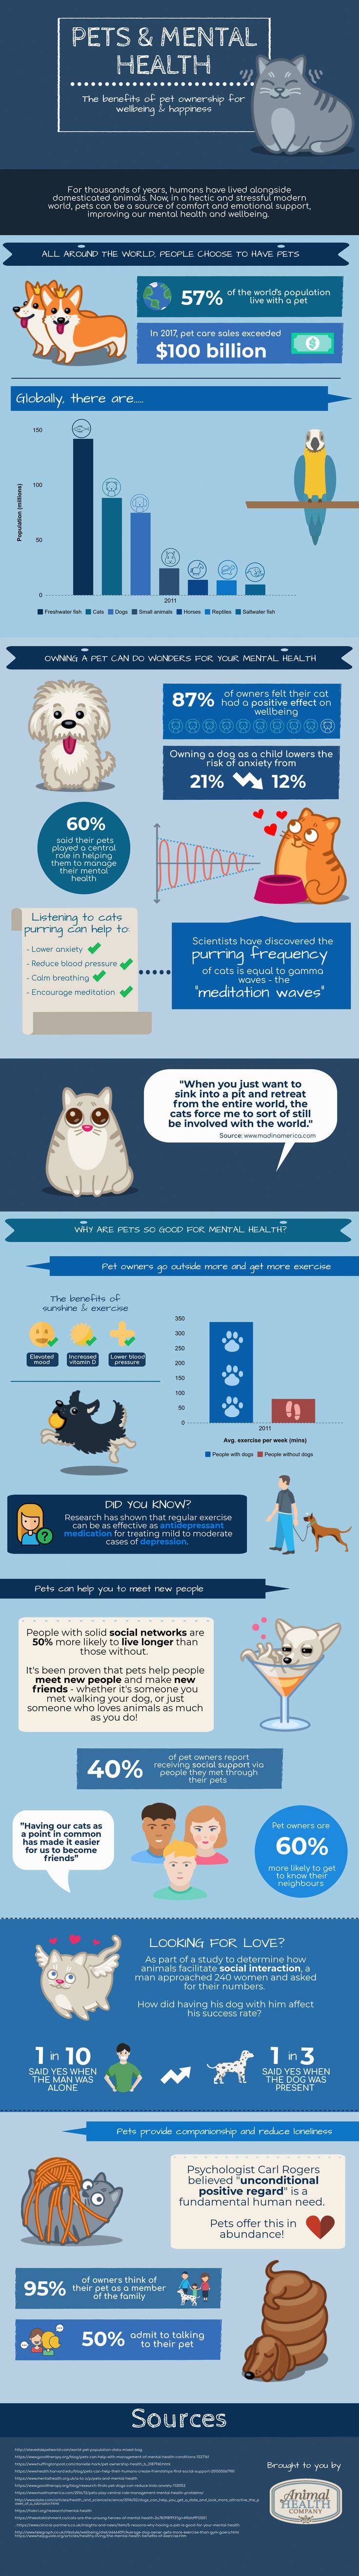 Psychology-Infographic-Pets-and-Mental-Health-The-Benefits Psychology Infographic : Pets and Mental Health | The Benefits of Pet Ownership for Wellbeing and Happine...